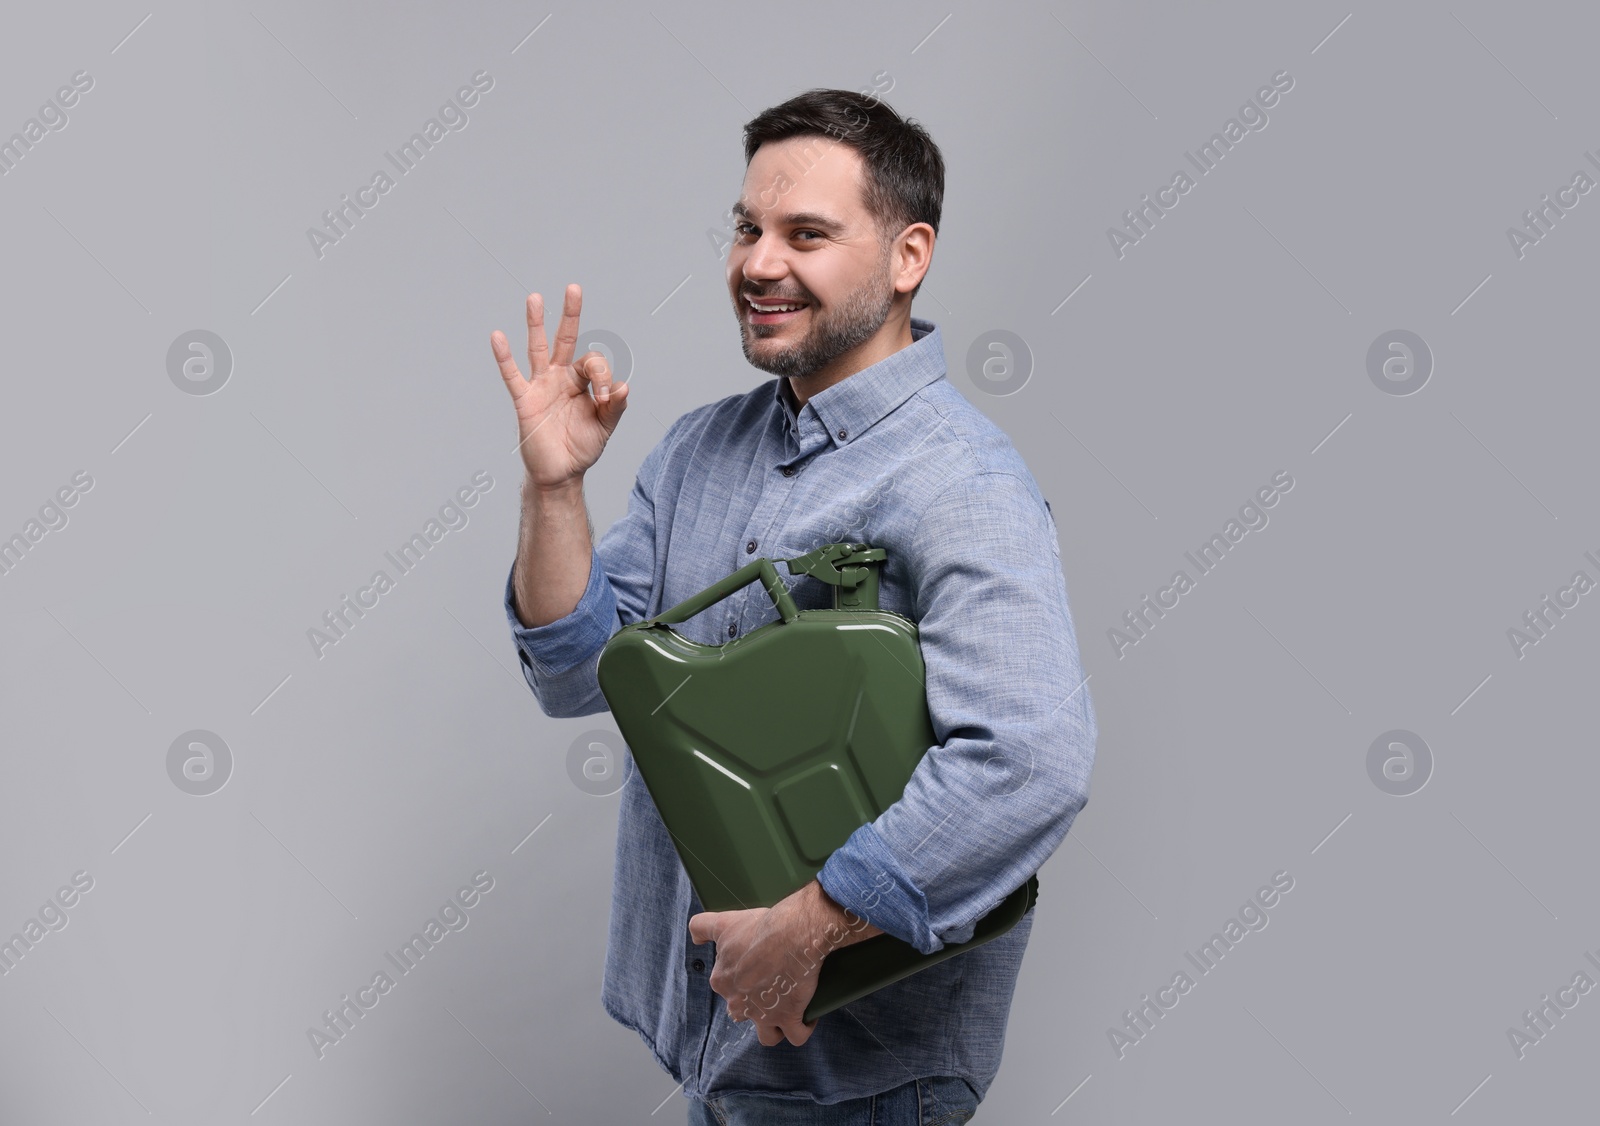 Photo of Man holding khaki metal canister and showing OK gesture on light grey background